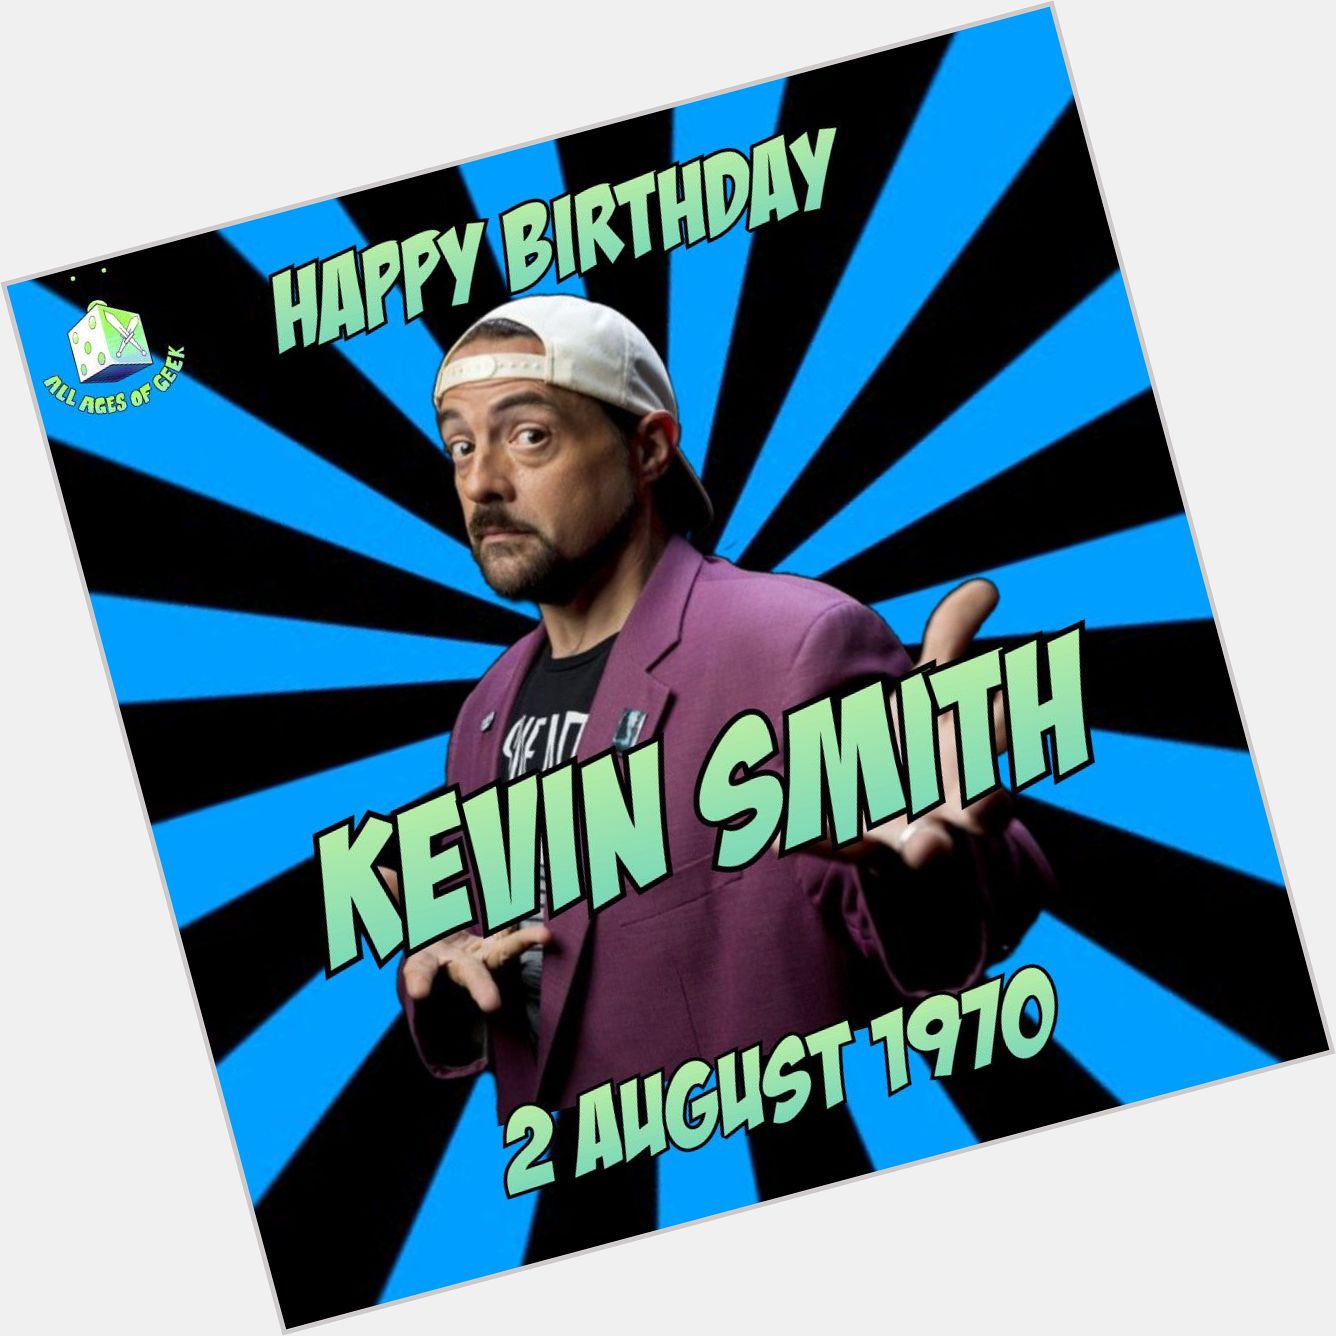 A true geek if there ever was one. Happy Birthday to Kevin Smith! 